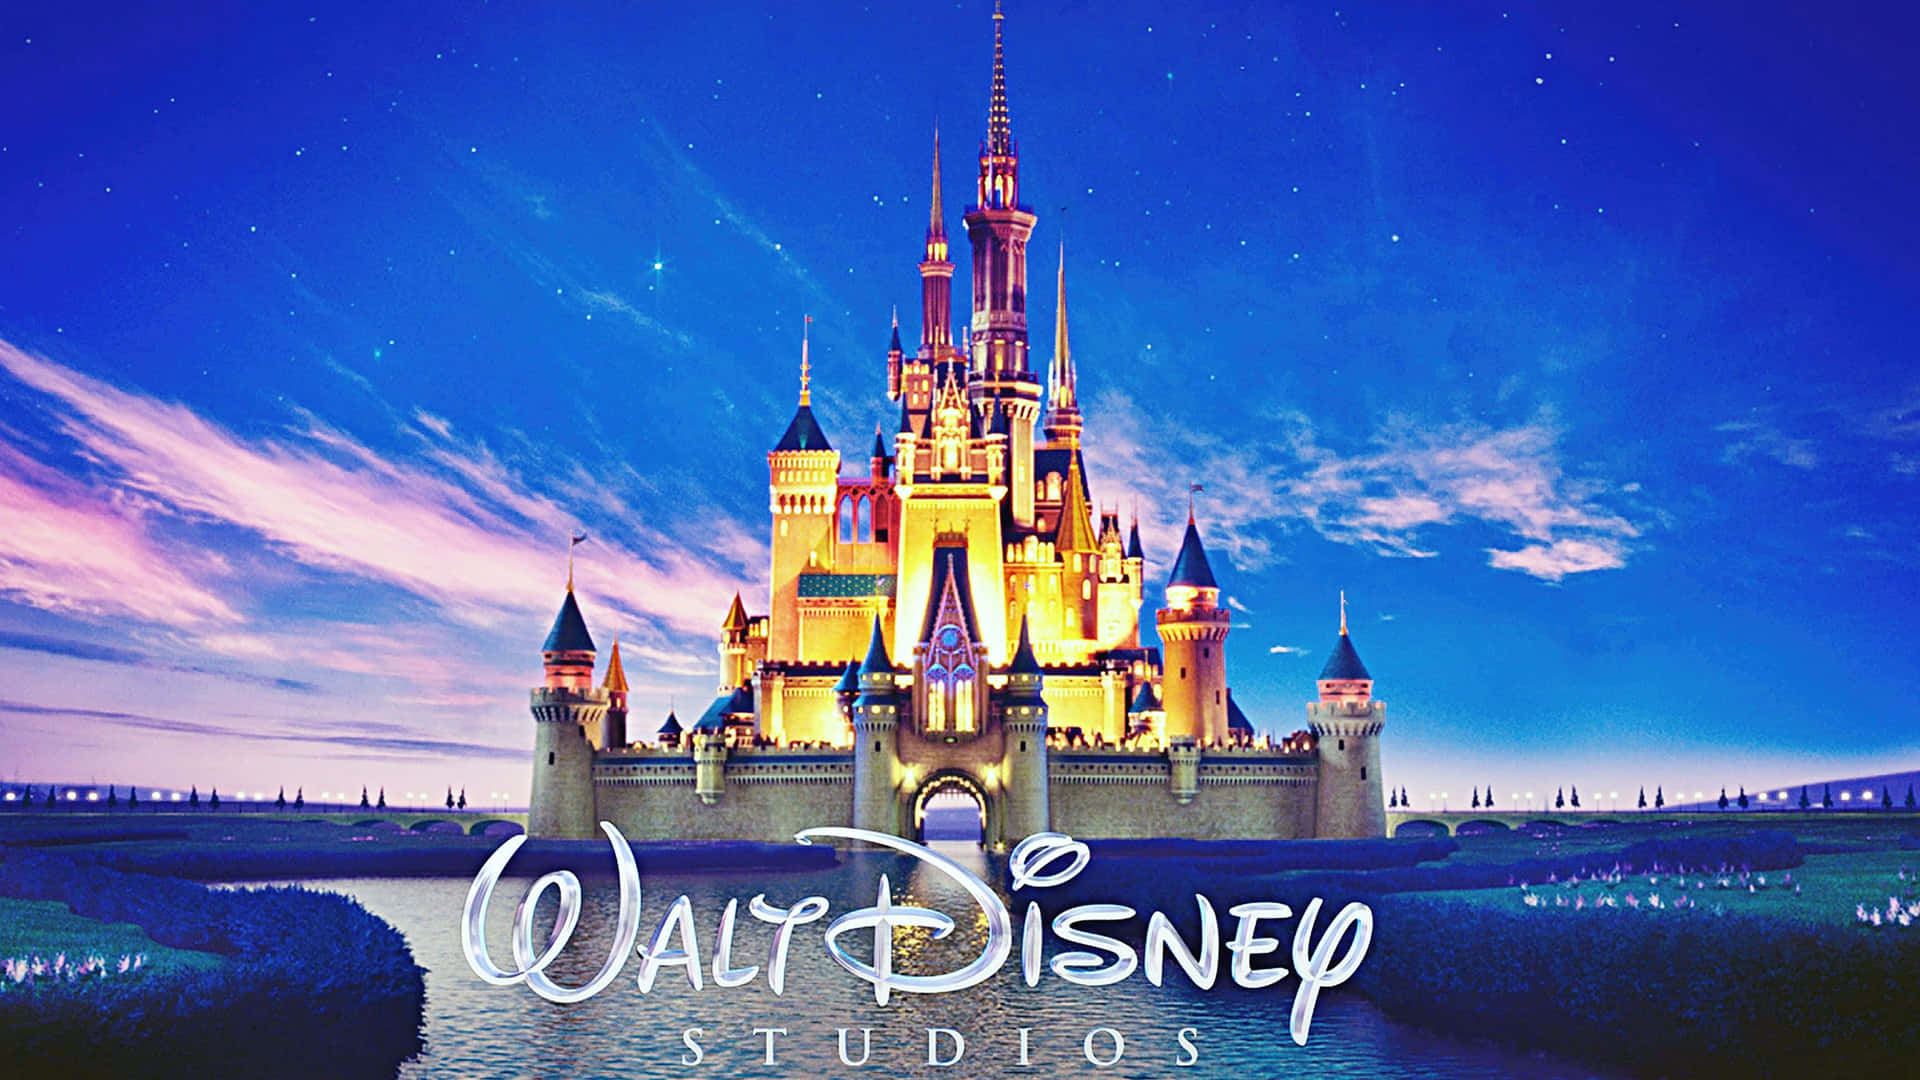 Explore the world of Disney with amazing Stories!